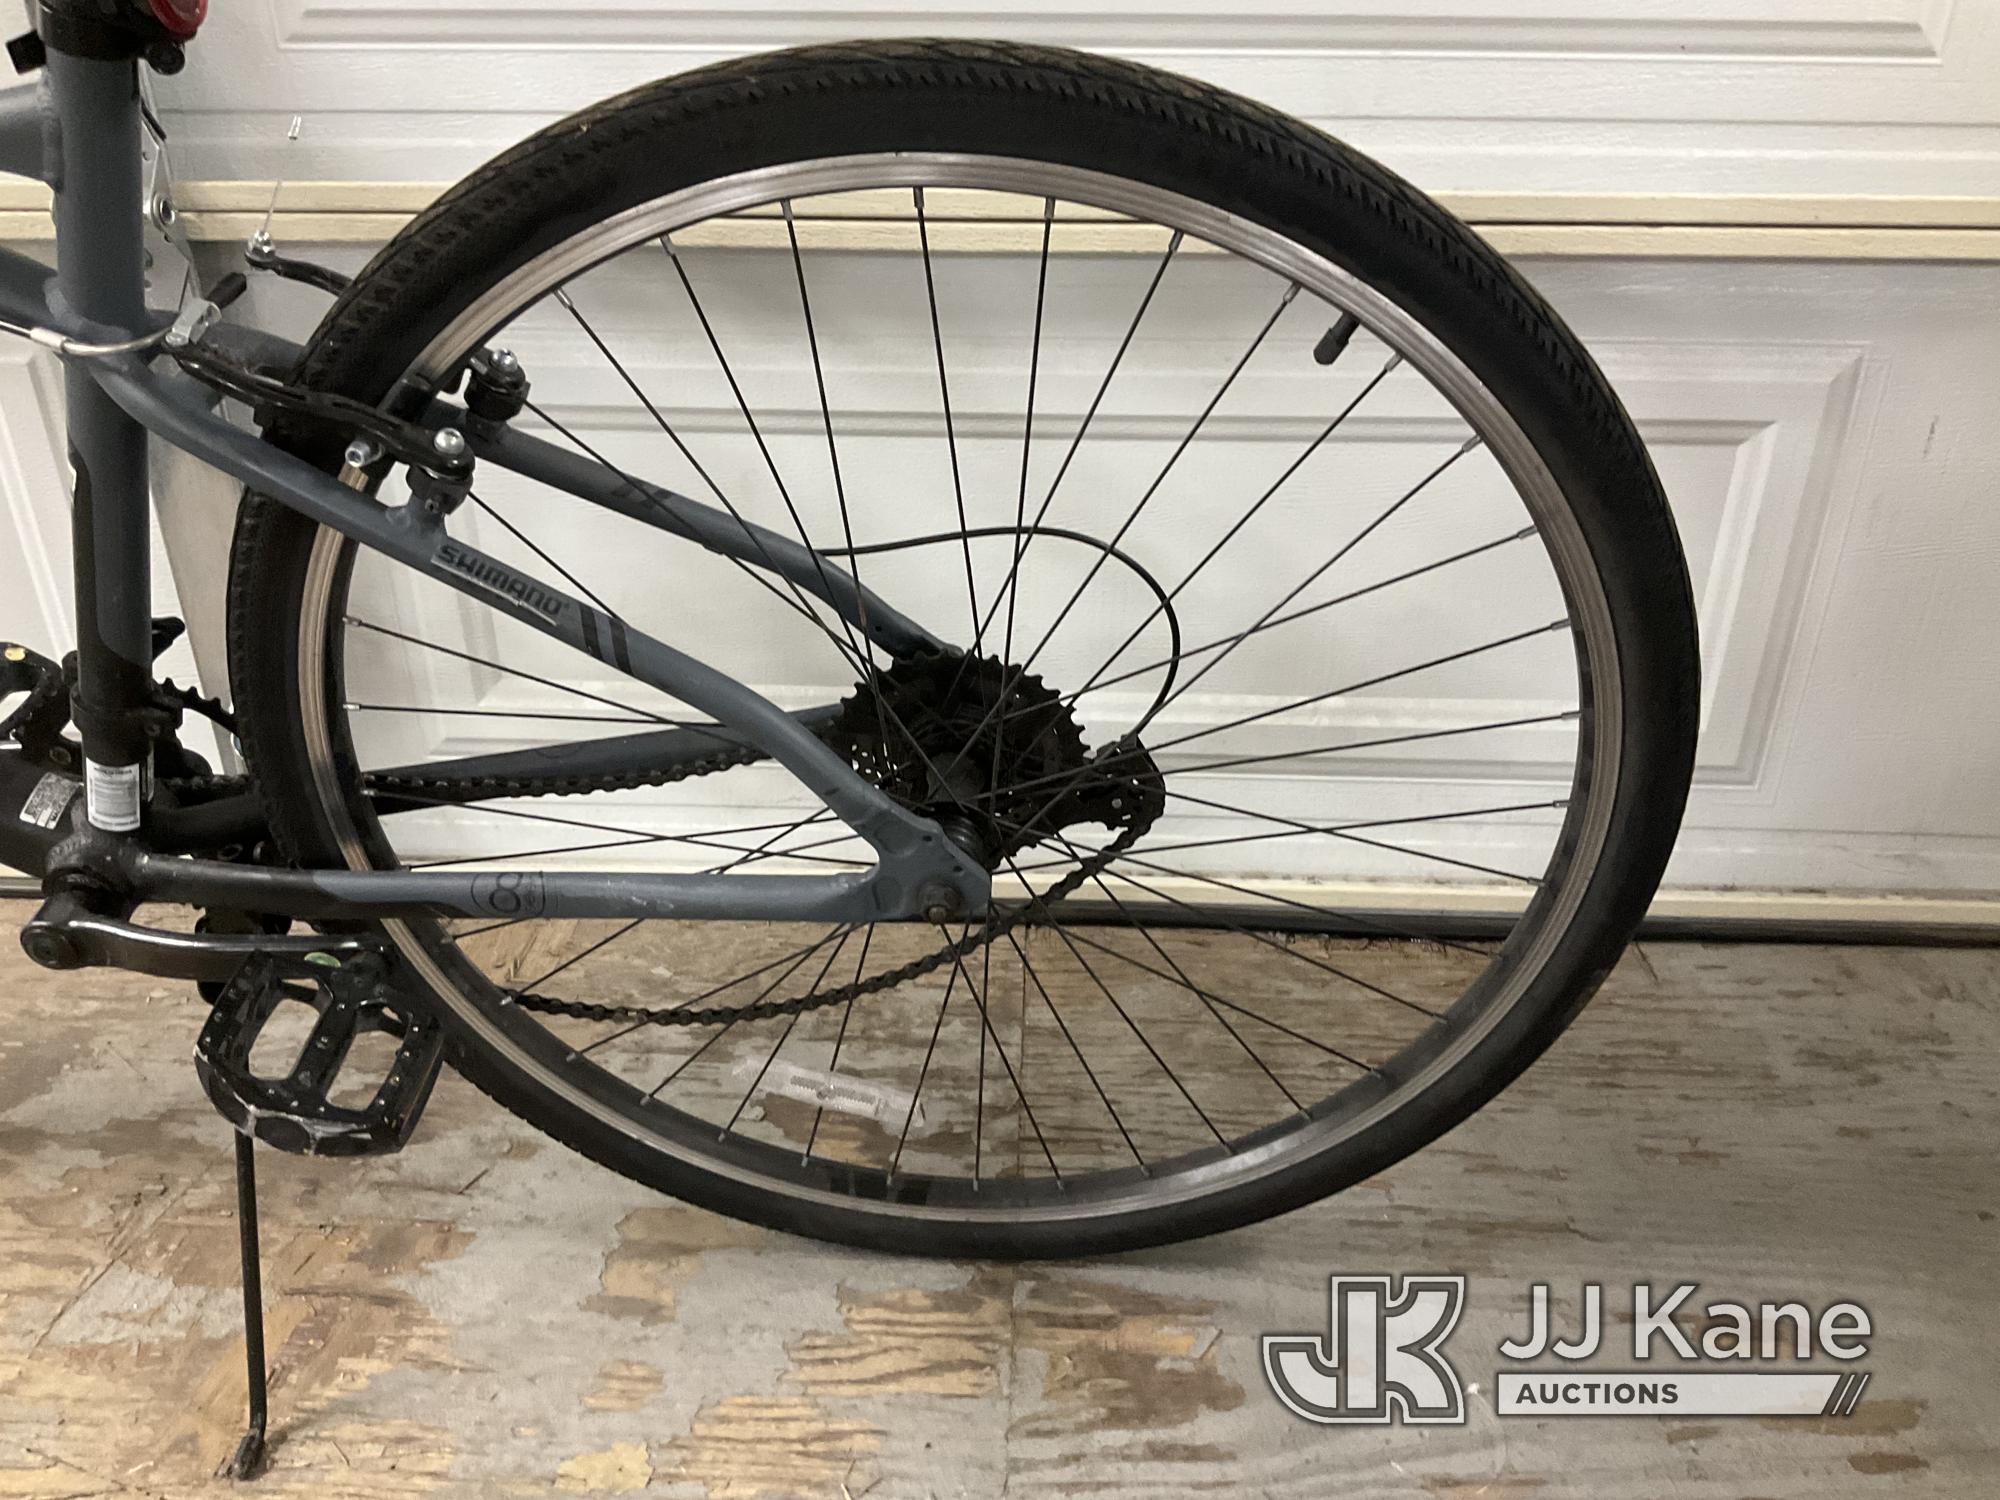 (Jurupa Valley, CA) Hyper Bike (Used) NOTE: This unit is being sold AS IS/WHERE IS via Timed Auction